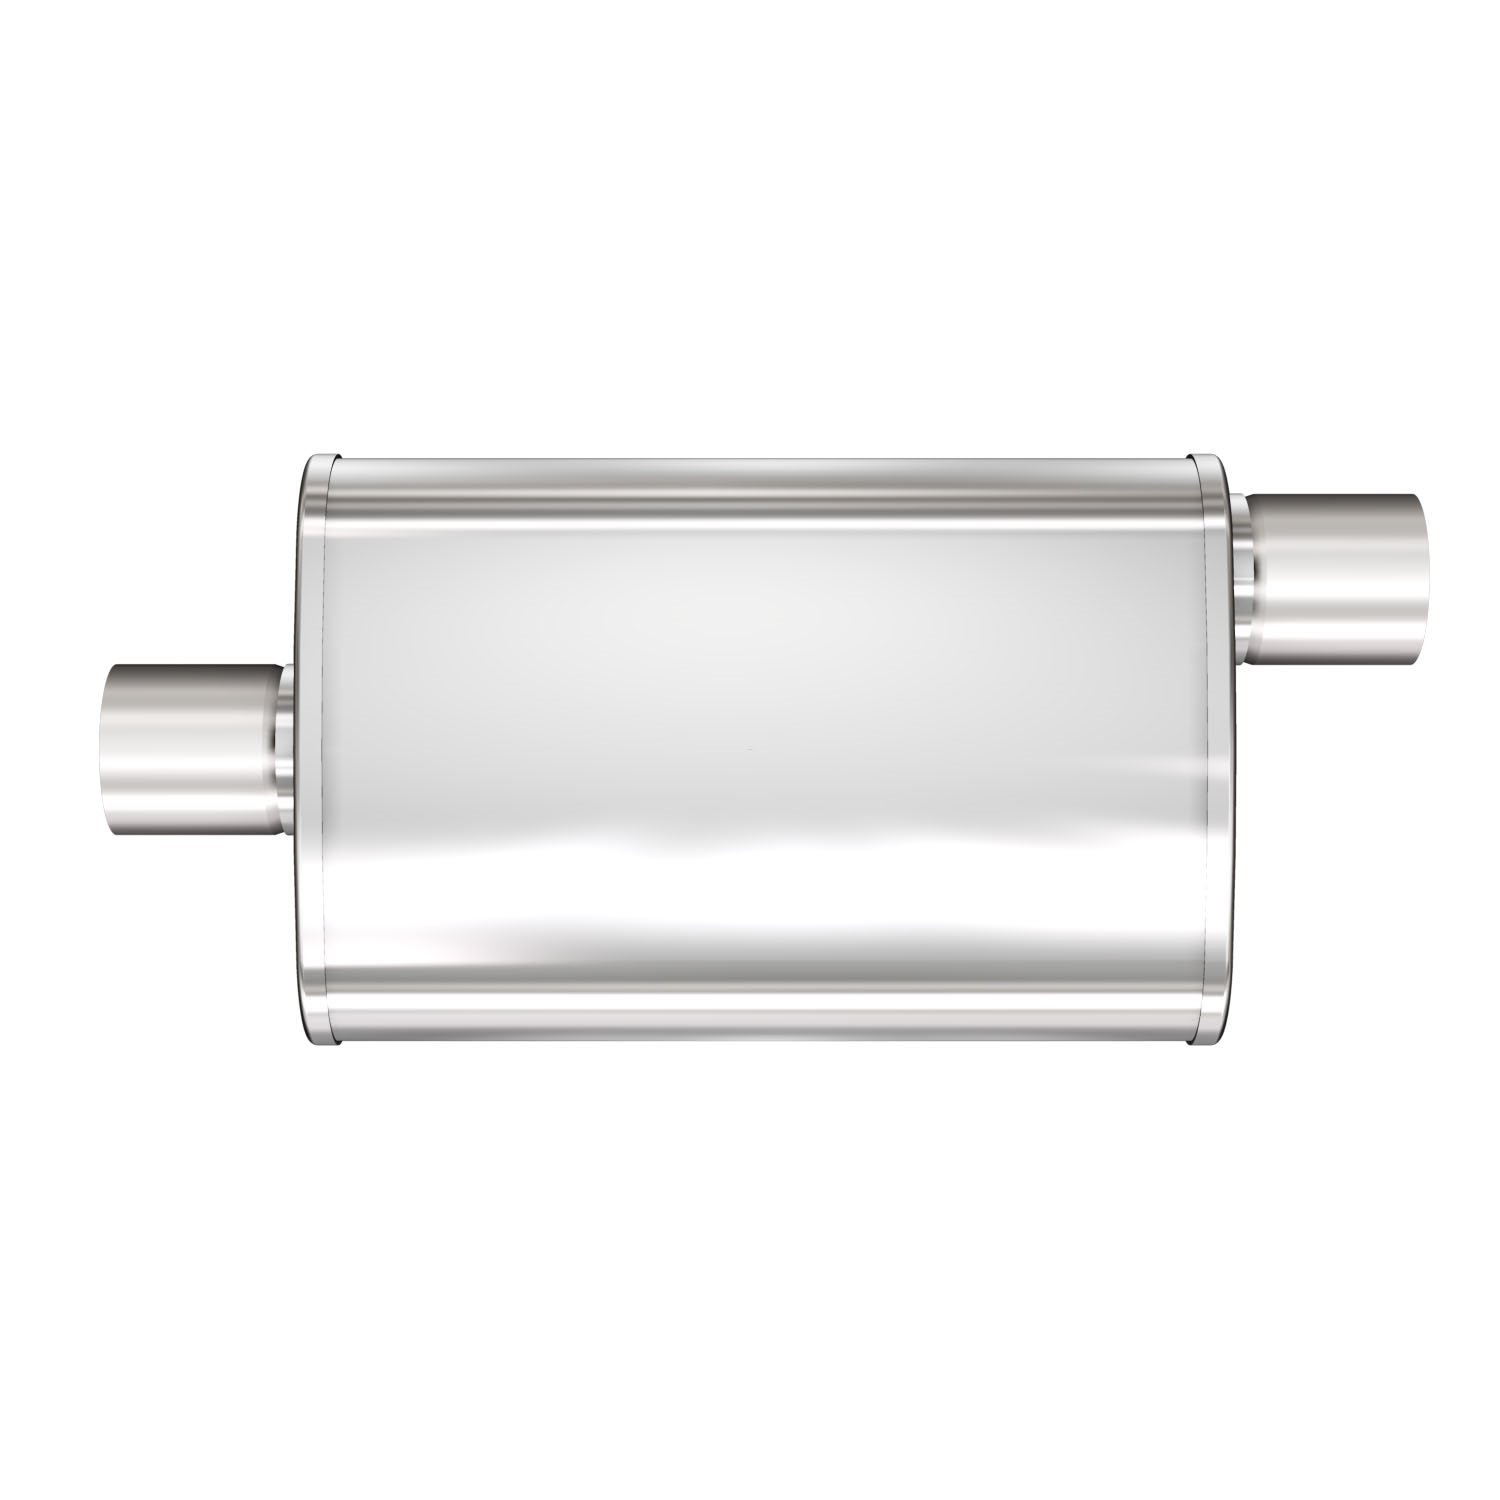 4" x 9" Oval XL 3-Chamber Muffler Center In/Offset Out: 2.25"/2.25" Body Length: 14" Overall Length: 20" Satin Finish